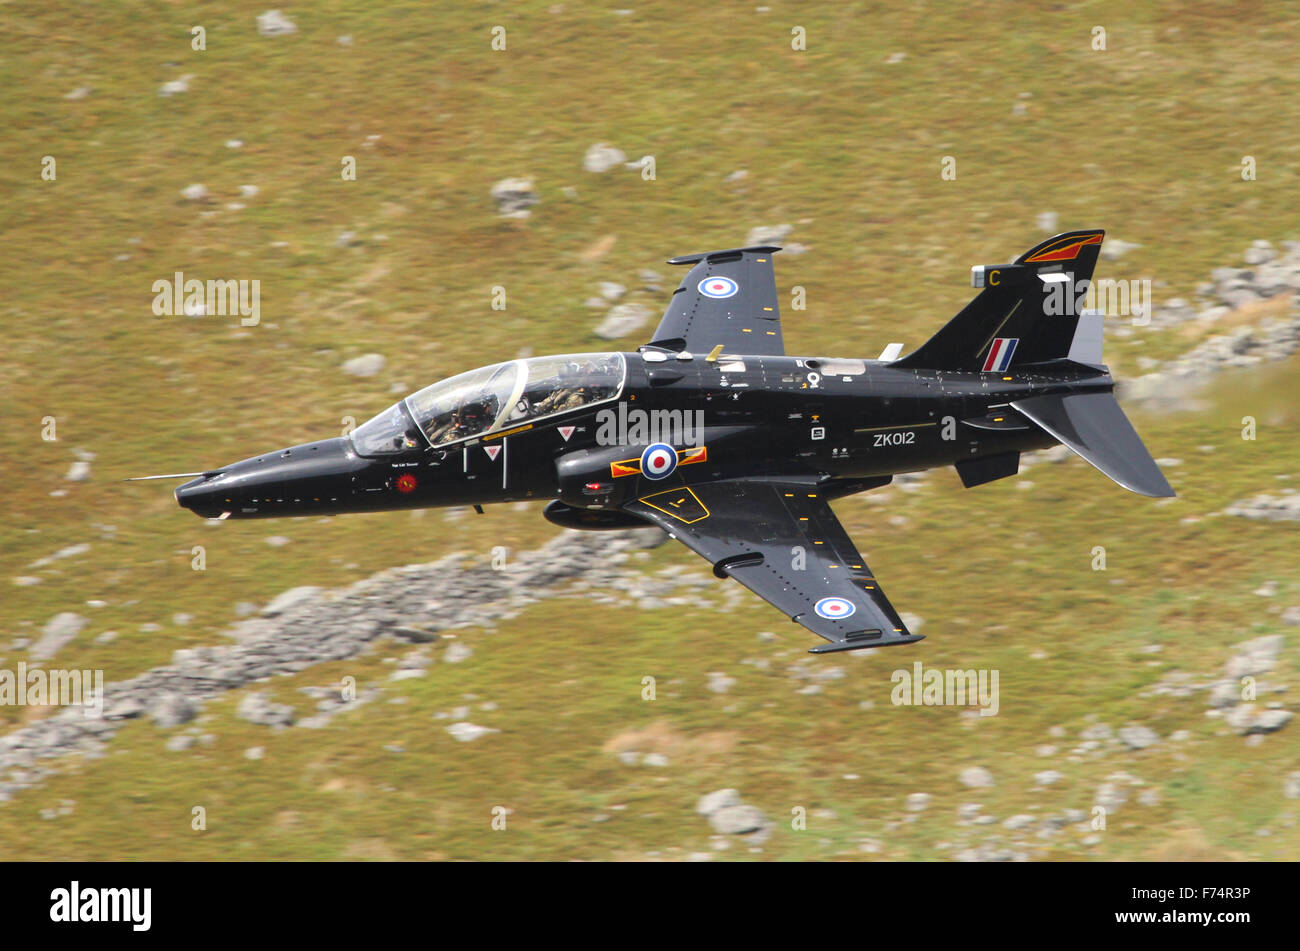 RAF Hawk T2 jet training aircraft on a low level flying exercise in Wales, UK. Stock Photo